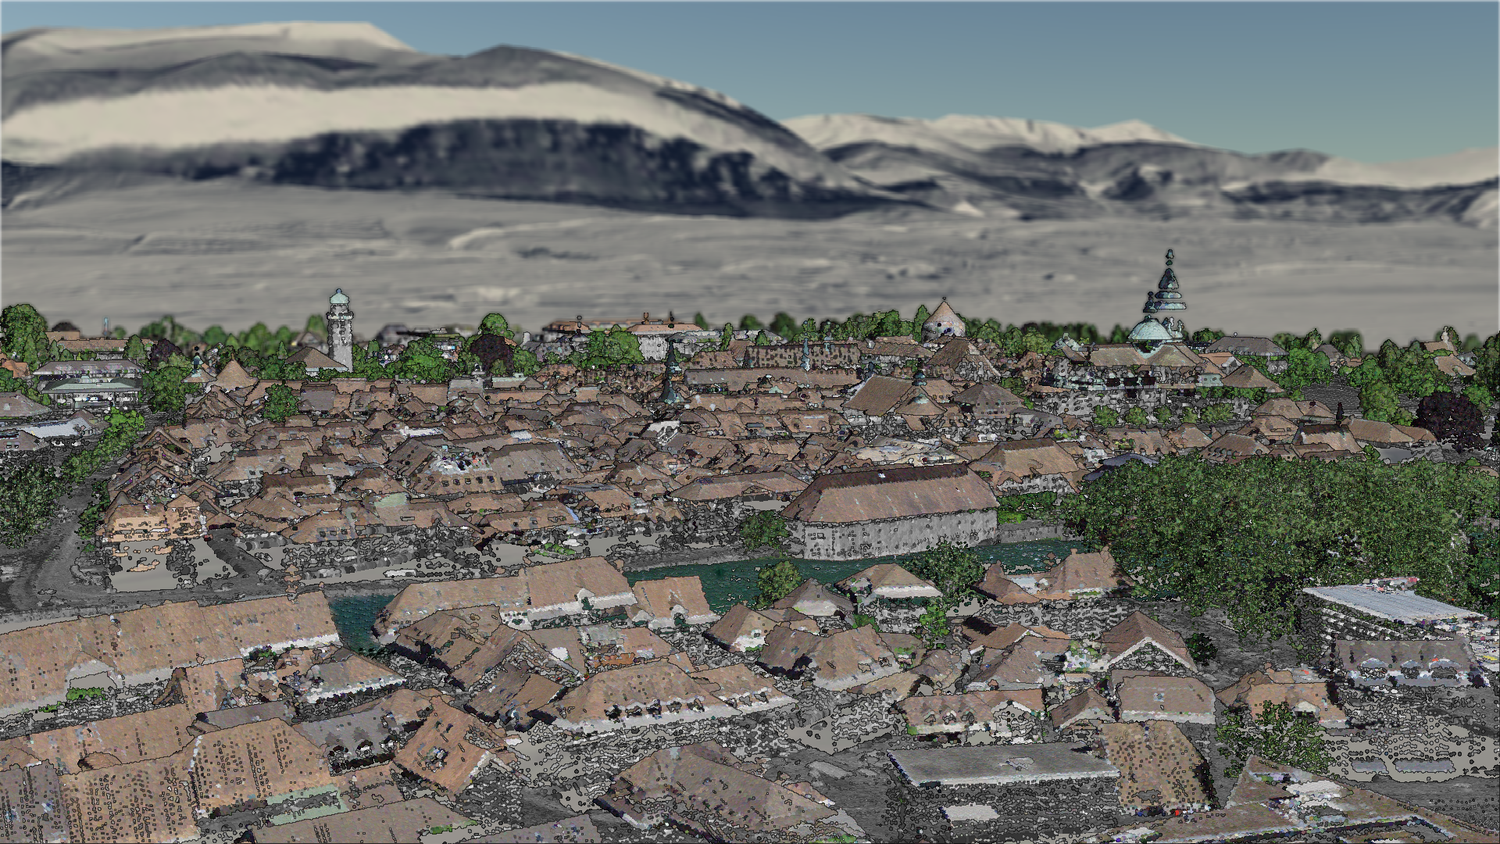 The city of Solothurn shown in the form of a LiDAR point cloud.